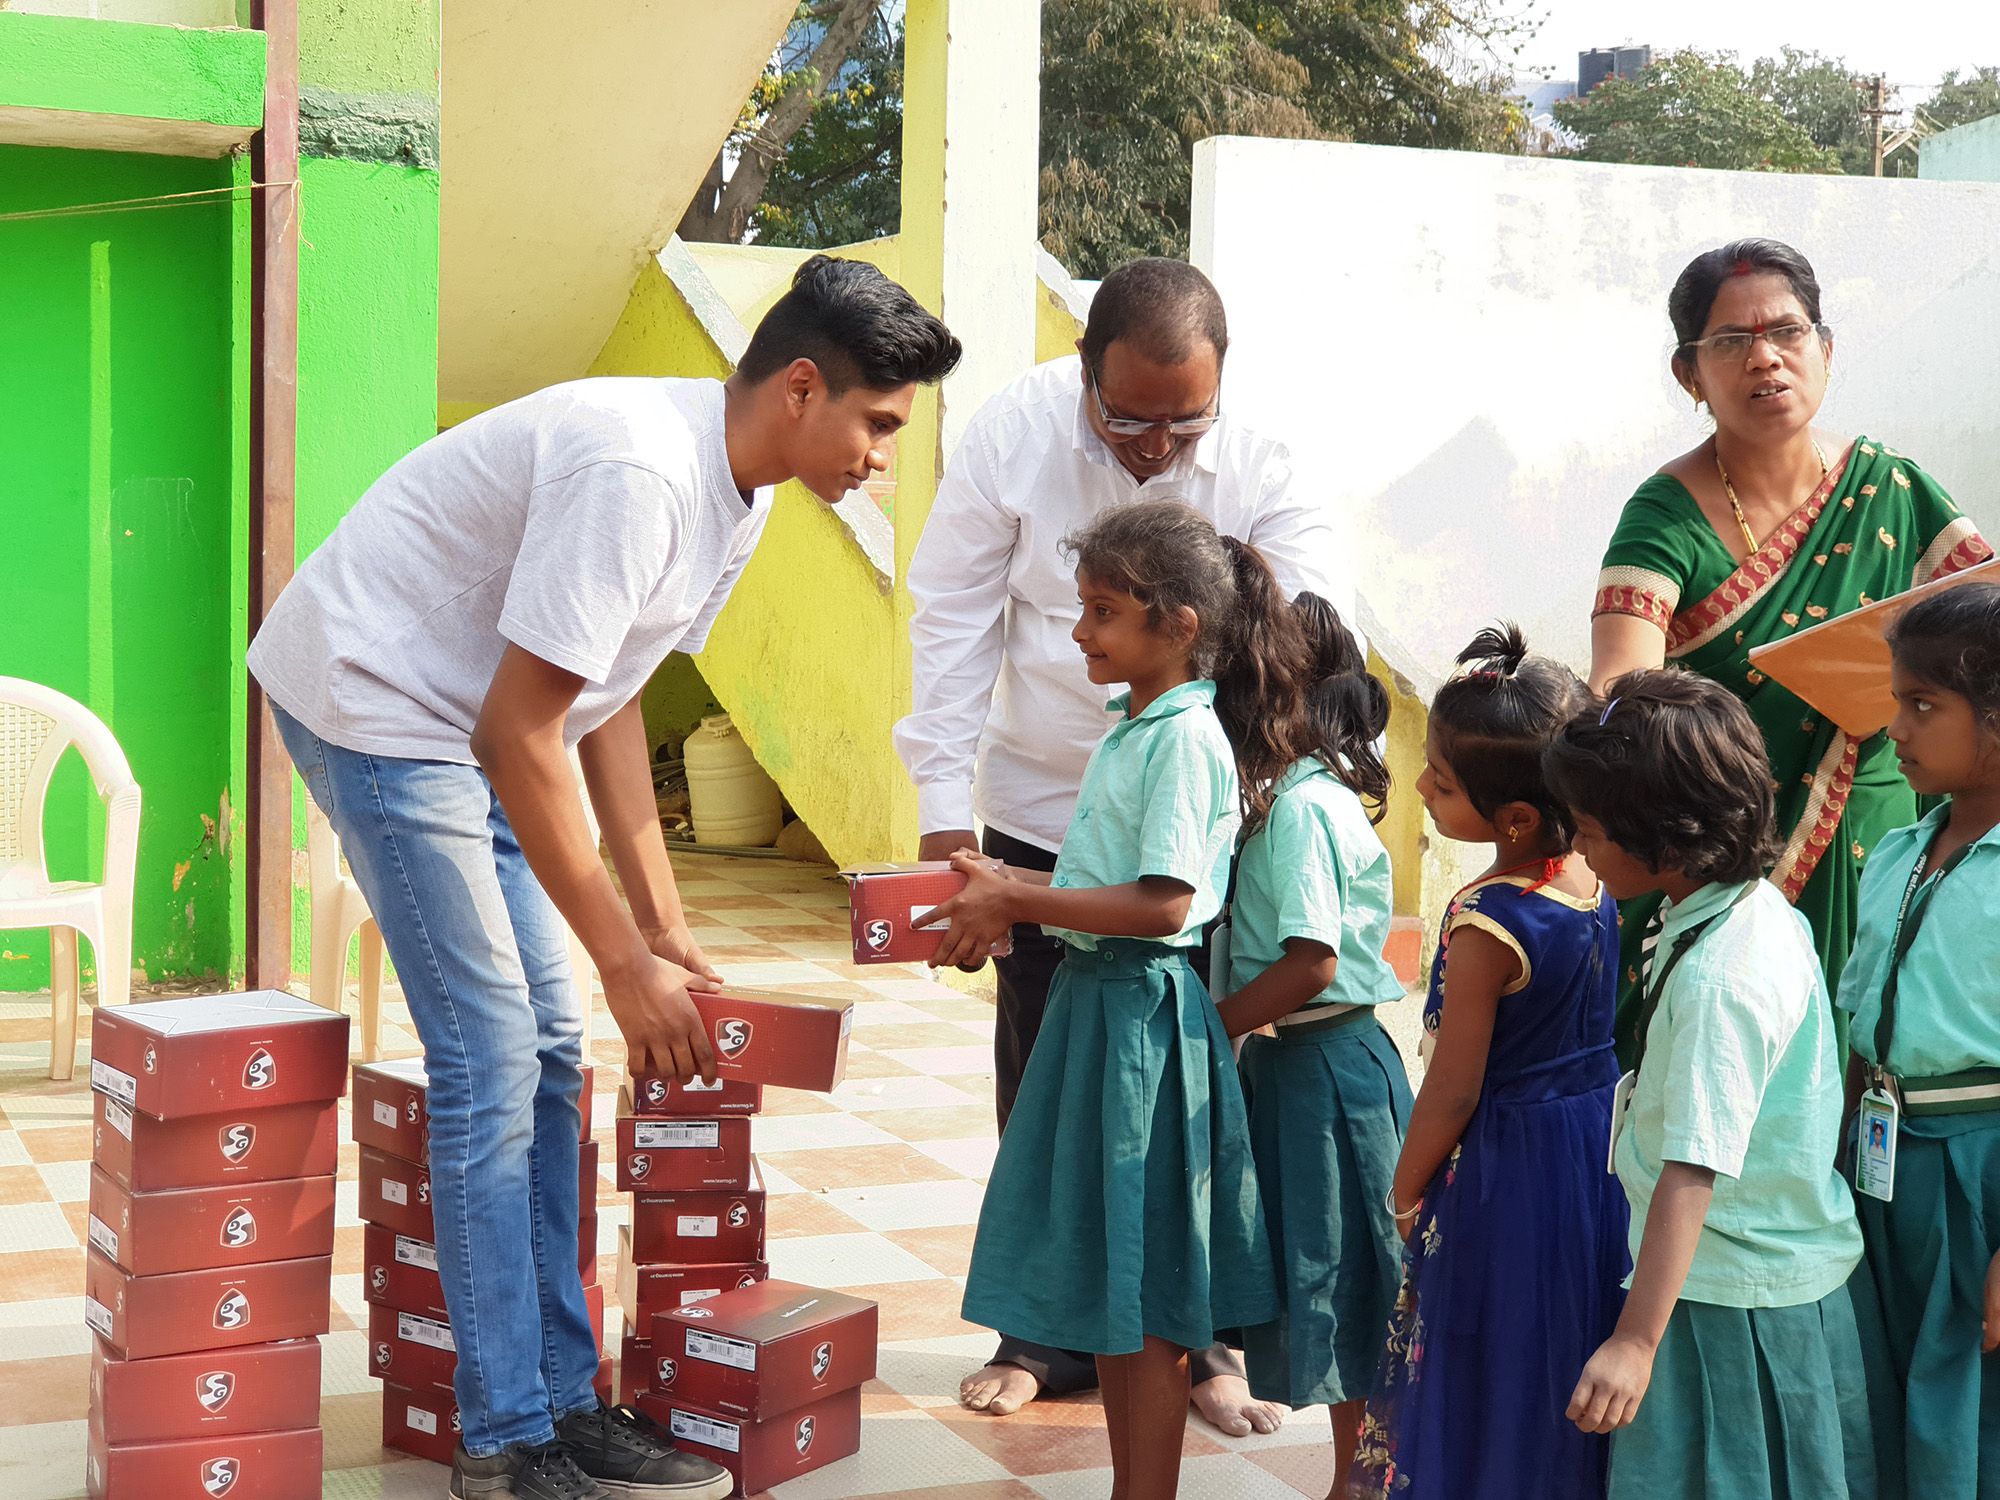 Sanjay Rajasekharan and Cleo donated nearly 500 pairs of shoes as part of the Running4Shoes initiative in India.